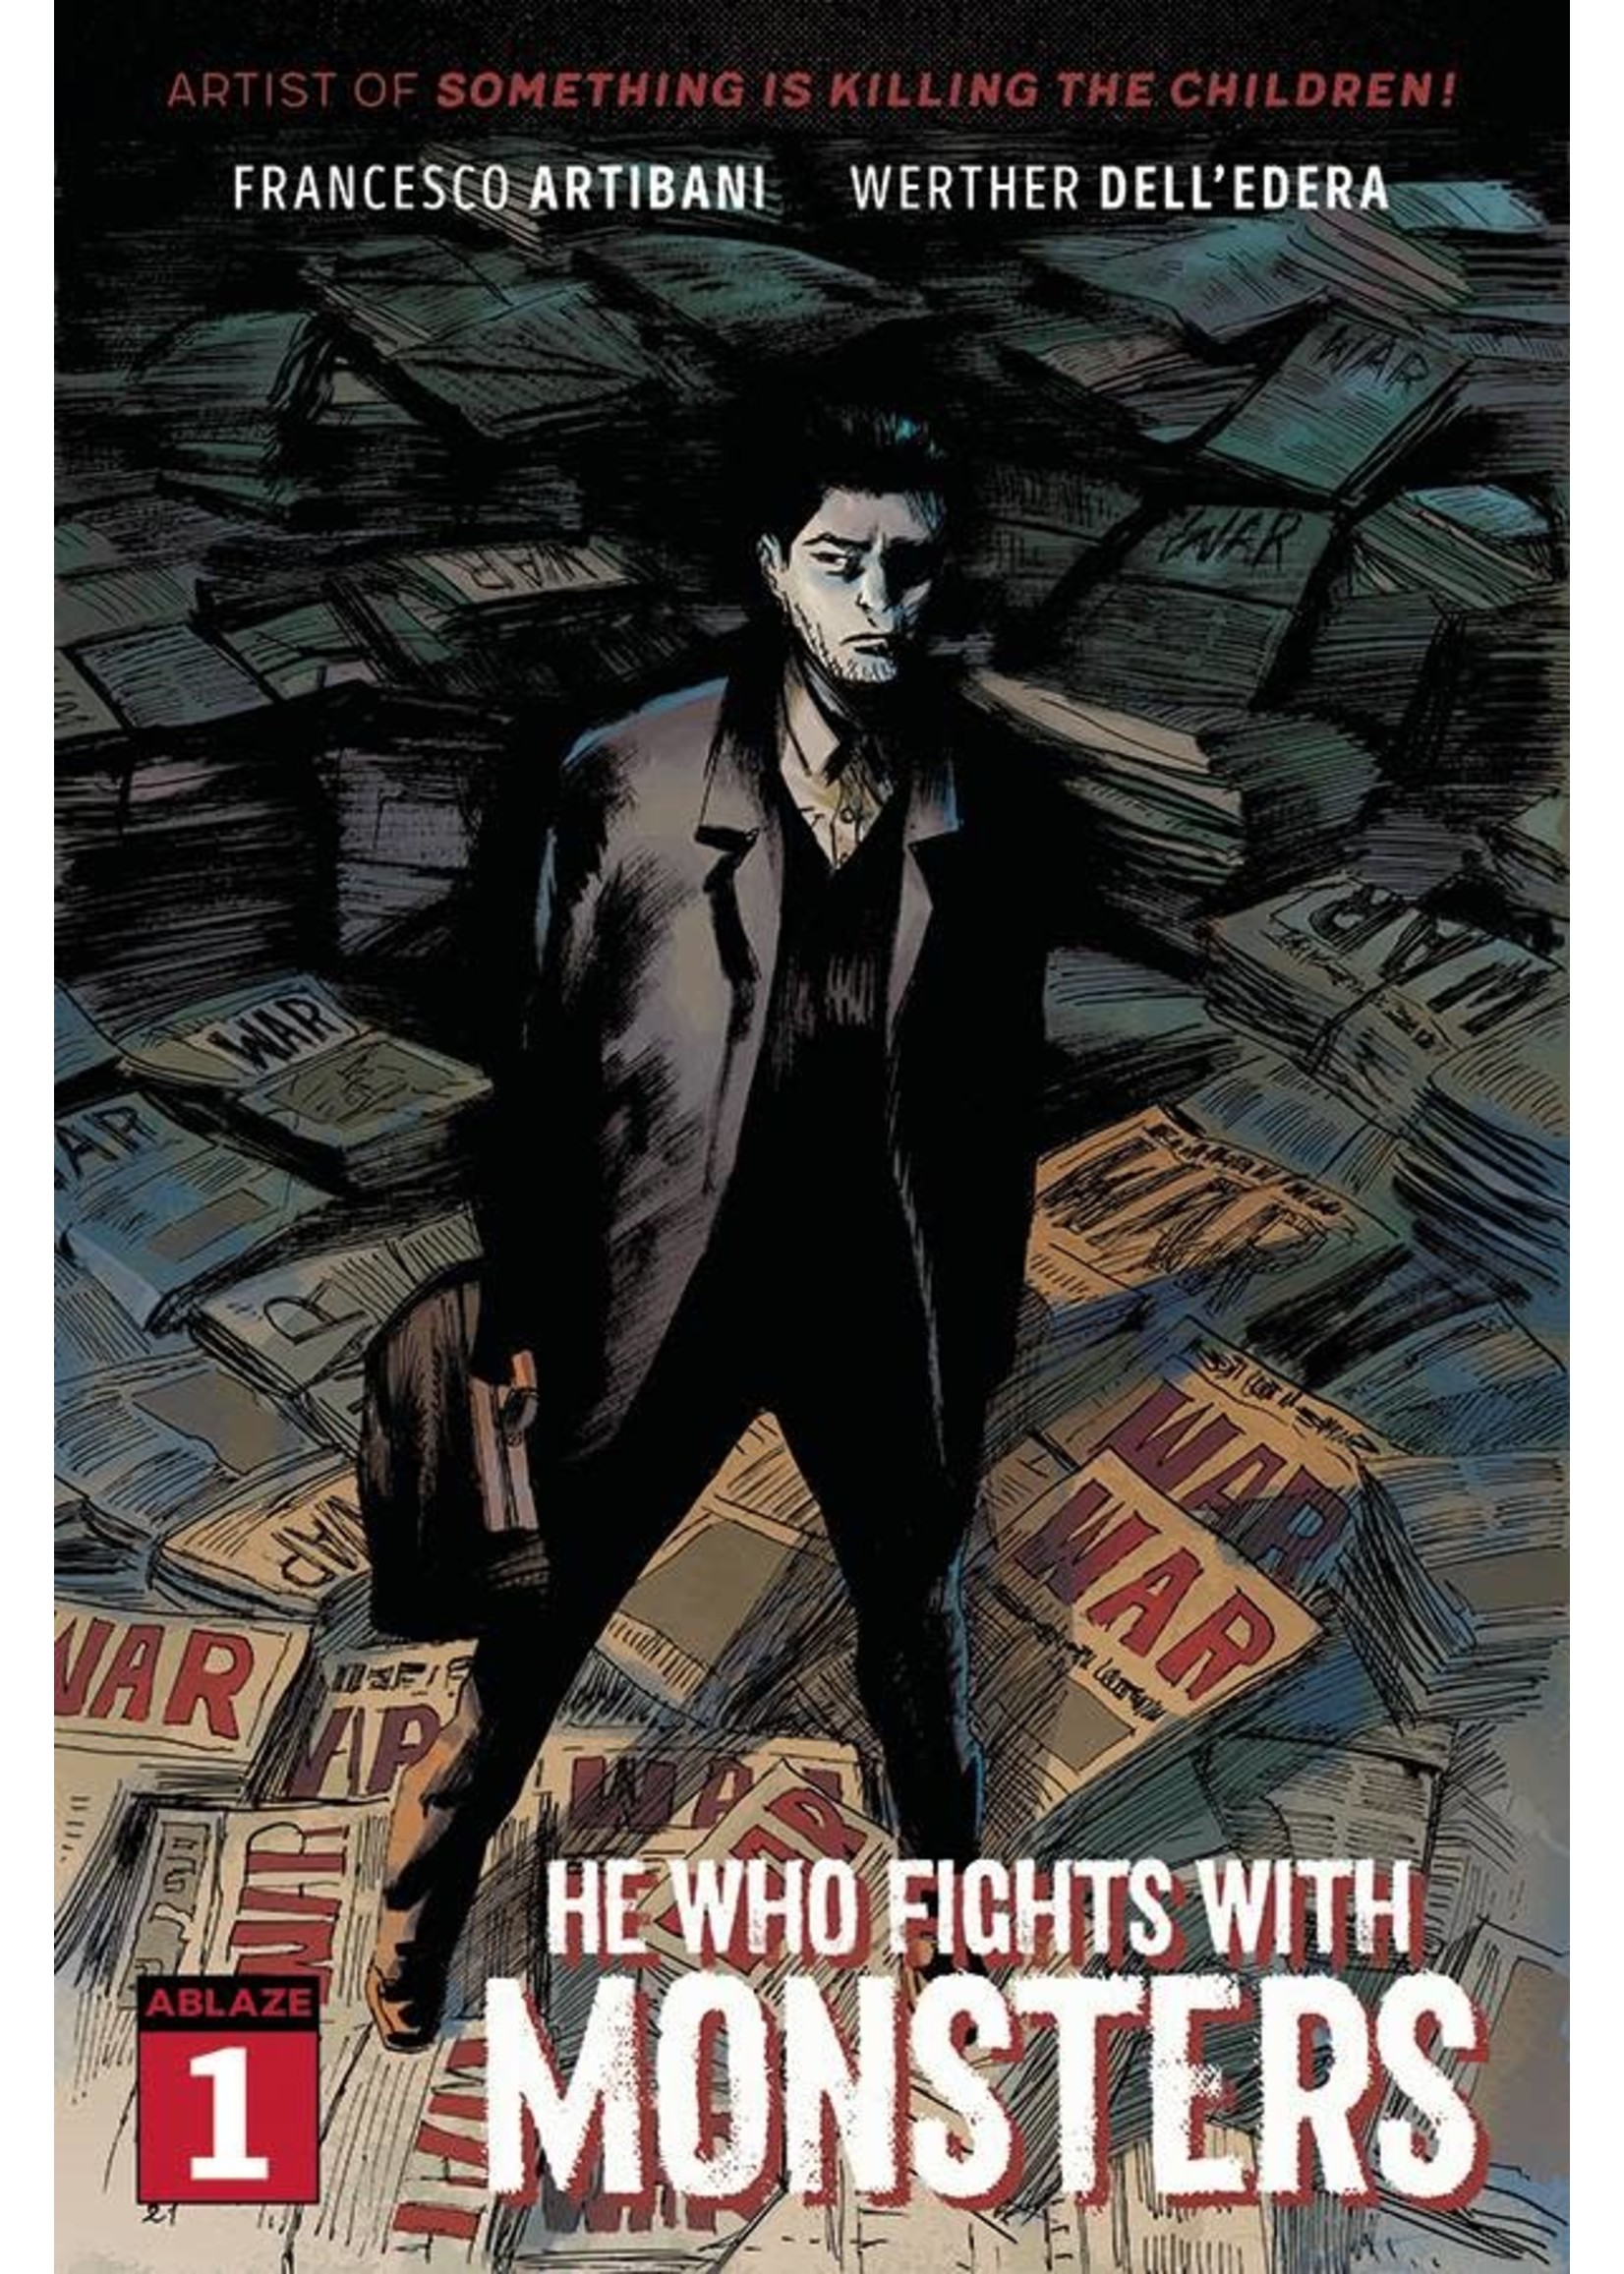 ABLAZE HE WHO FIGHTS WITH MONSTERS #1 CVR A DELLEDERA